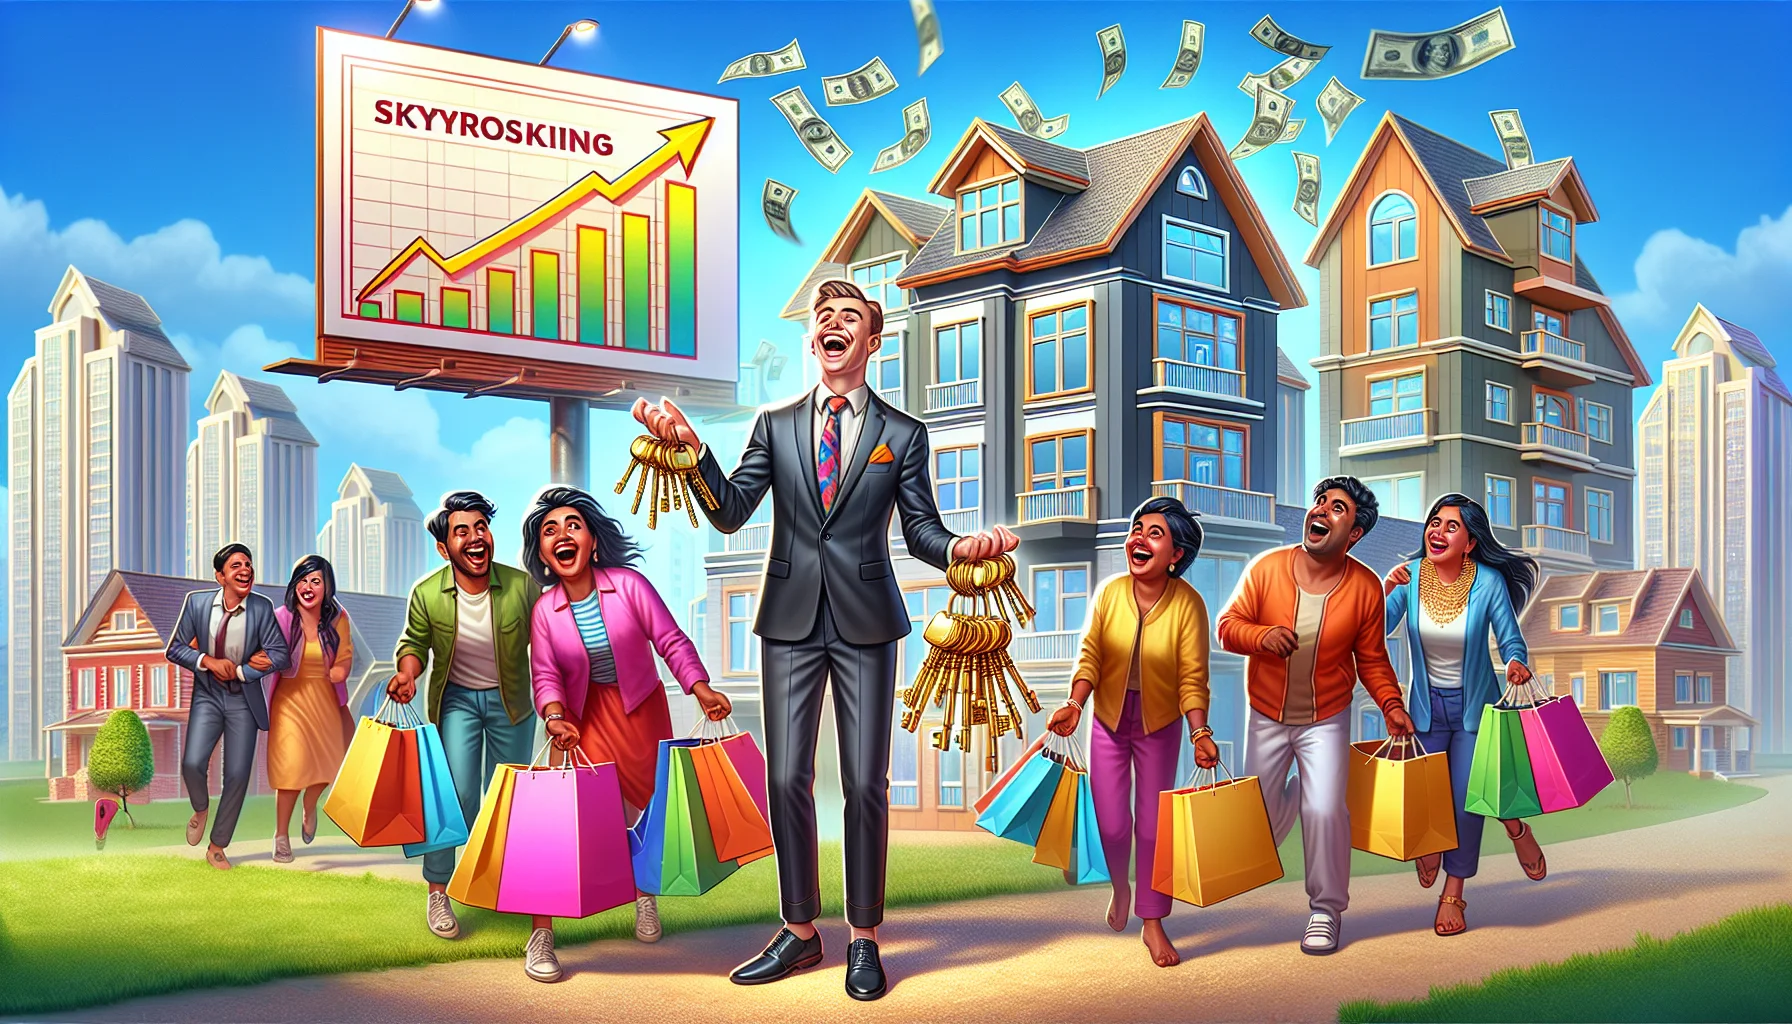 Design a humorous, lifelike scene of a flourishing real estate scenario. Picture a Caucasian male home investor standing in front of a row of pristine, newly built houses. He's laughing joyously whilst juggling shiny golden keys for each property. Nearby, a large, colourful billboard displays skyrocketing property values. South Asian female prospective homeowners, holding shopping bags full of cash, flock towards him excitedly. Everyone's expressions convey sheer delight and optimism for the beneficial housing market. Create the image in a sunny, vibrant setting to mirror the positive atmosphere.